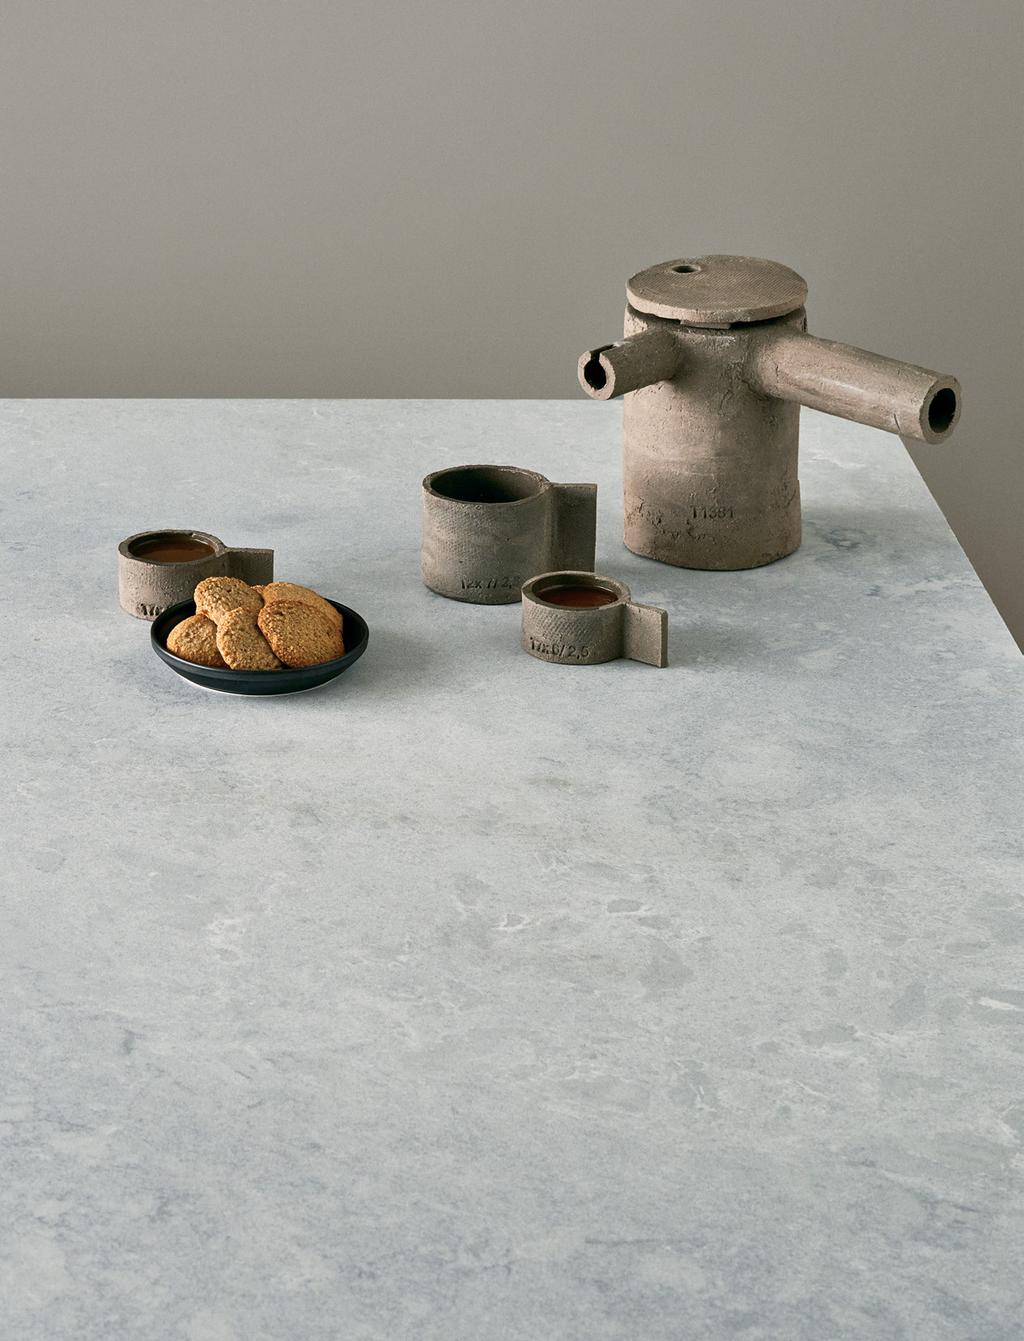 Caesarstone Delivers Uncompromising Peformance Caesarstone quartz surfaces are hard and nonporous, making them a breeze to clean, so you can always maintain the Caesarstone shine.